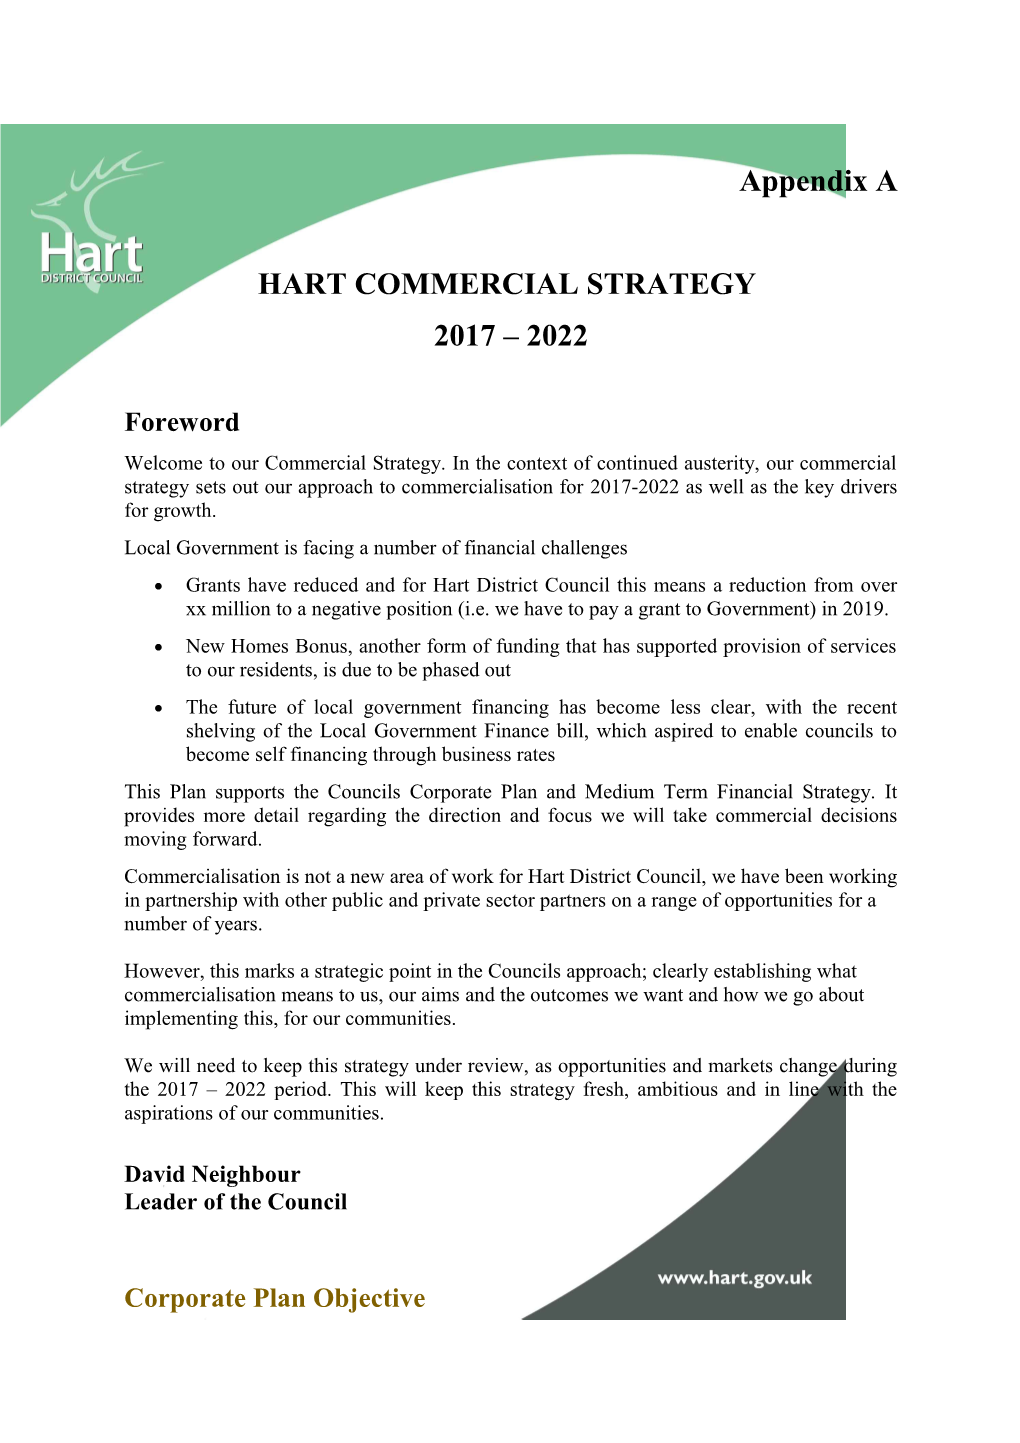 Hart Commercial Strategy